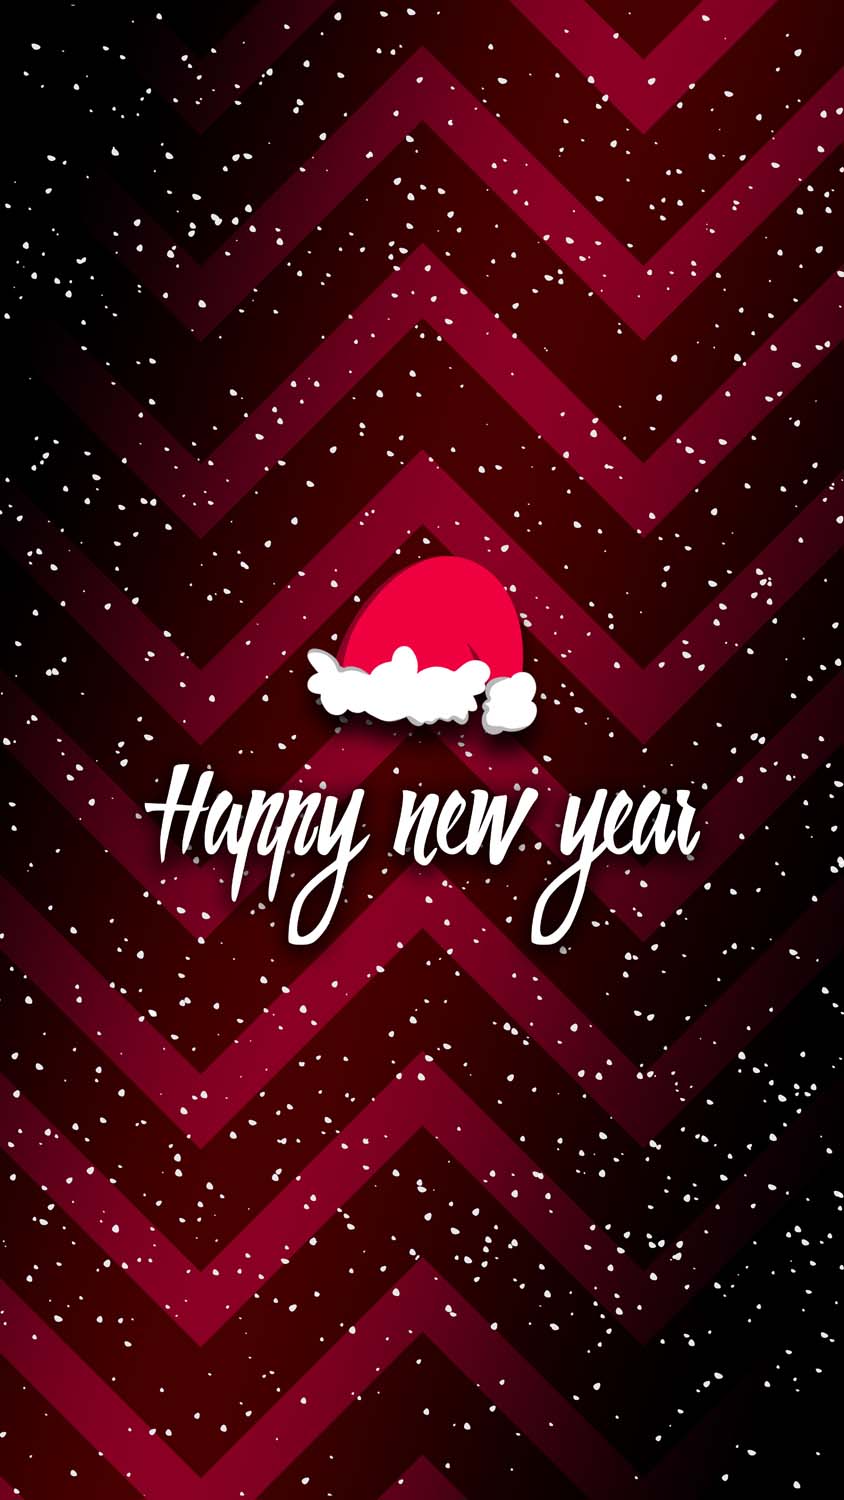 Happy New Year Christmas IPhone Wallpaper HD - IPhone Wallpapers : iPhone  Wallpapers